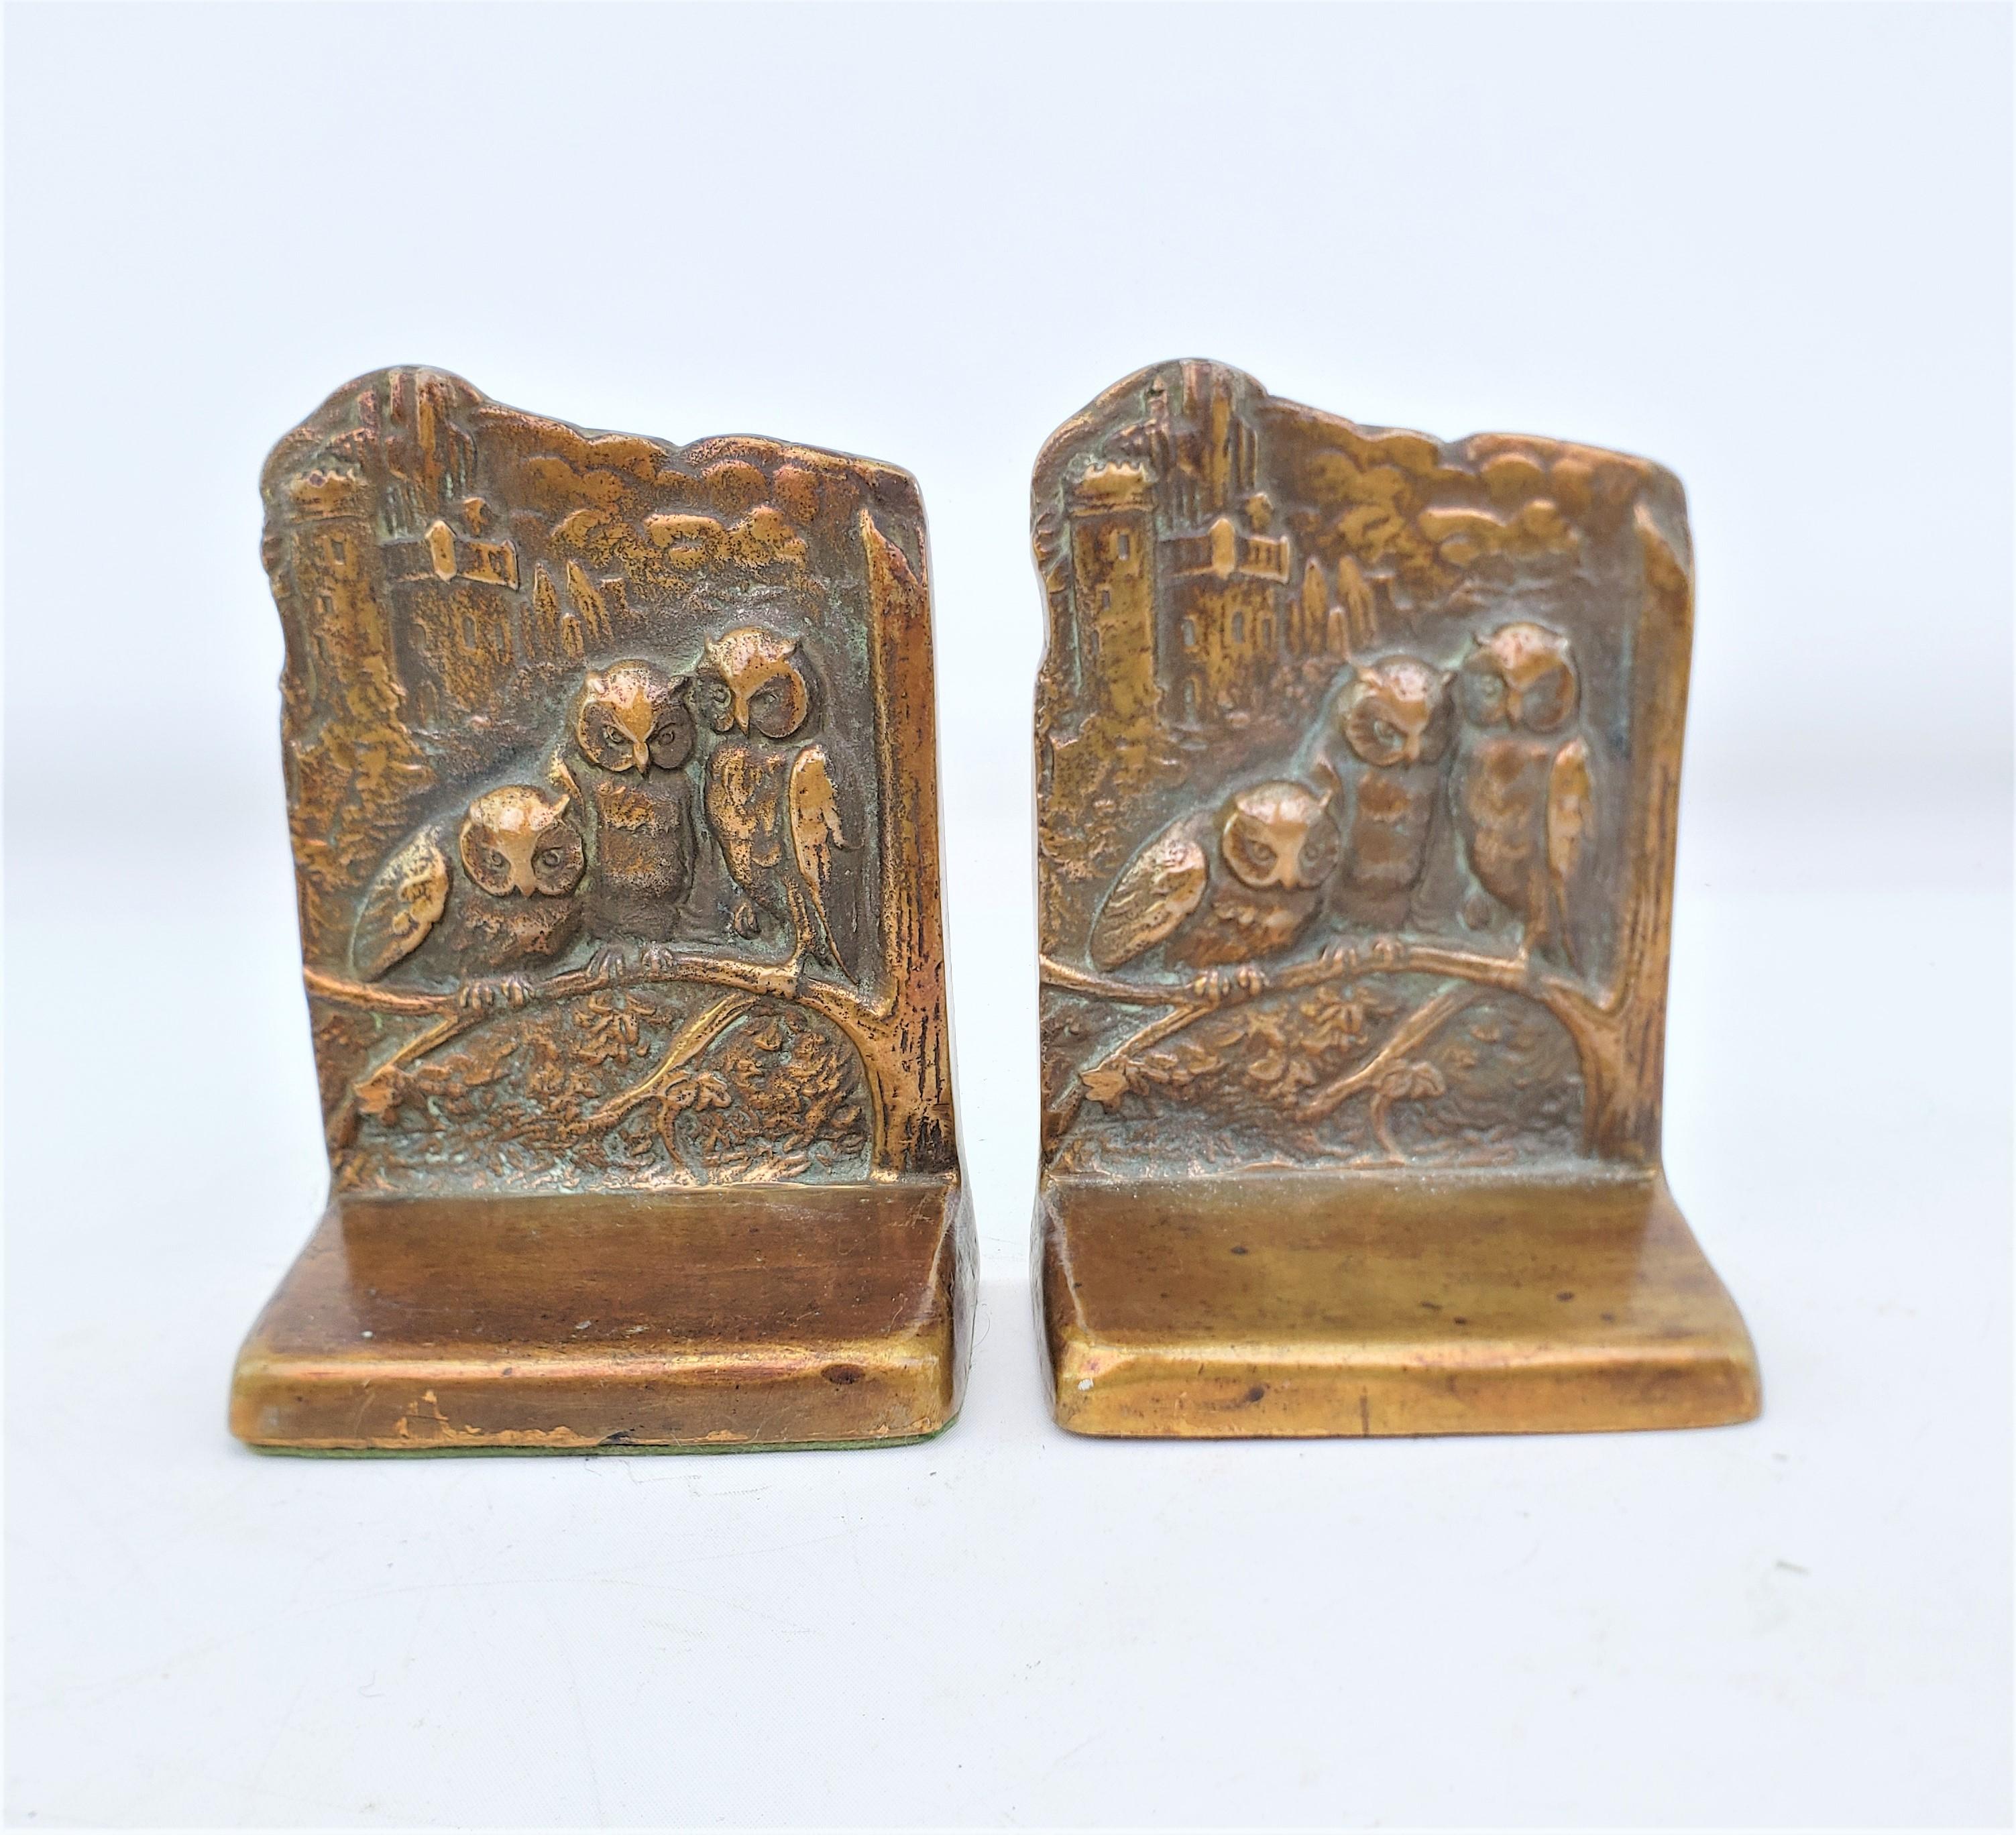 This pair of antique bookends are unsigned, but presumed to have originated from the United States and date to approximately 1920 and done in the period Art Deco style. The bookends are composed of cast brass with a lacquered finish and depict three